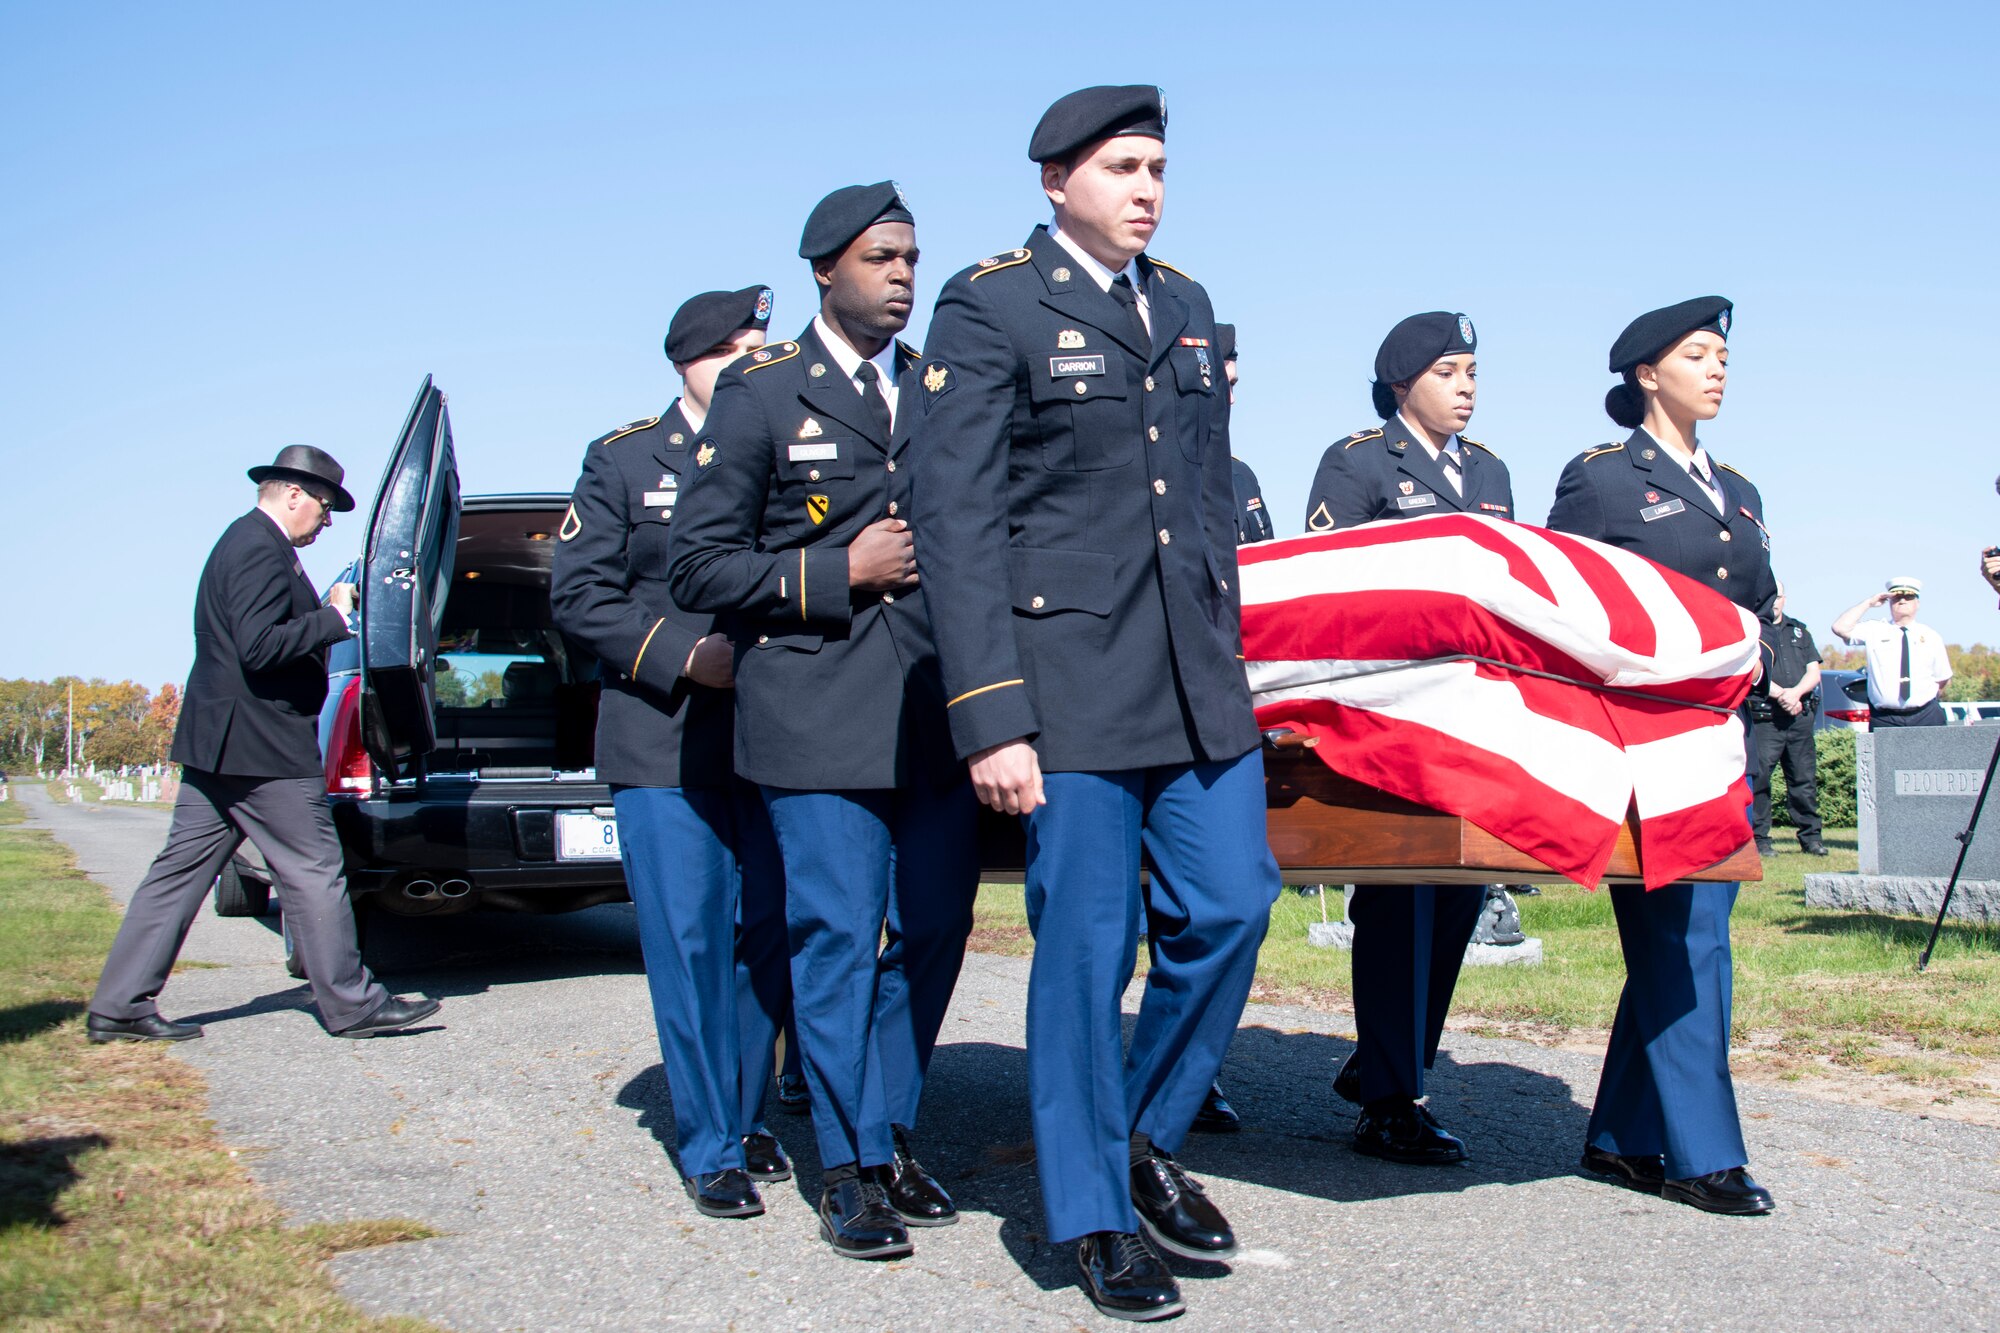 Members of the U.S. Army Honor Guard team from Fort Drum, New York, carry the casket of U.S. Army Air Forces 2nd Lt. Ernest Vienneau, former 97th Bombardment Group pilot, at Millinocket, Maine, Oct. 9, 2021. Military Honor Guard teams render professional military funeral honors, in accordance with service tradition, to all eligible veterans when requested by an authorized family member. (U.S. Air Force photo by Staff Sgt. Cody Dowell)